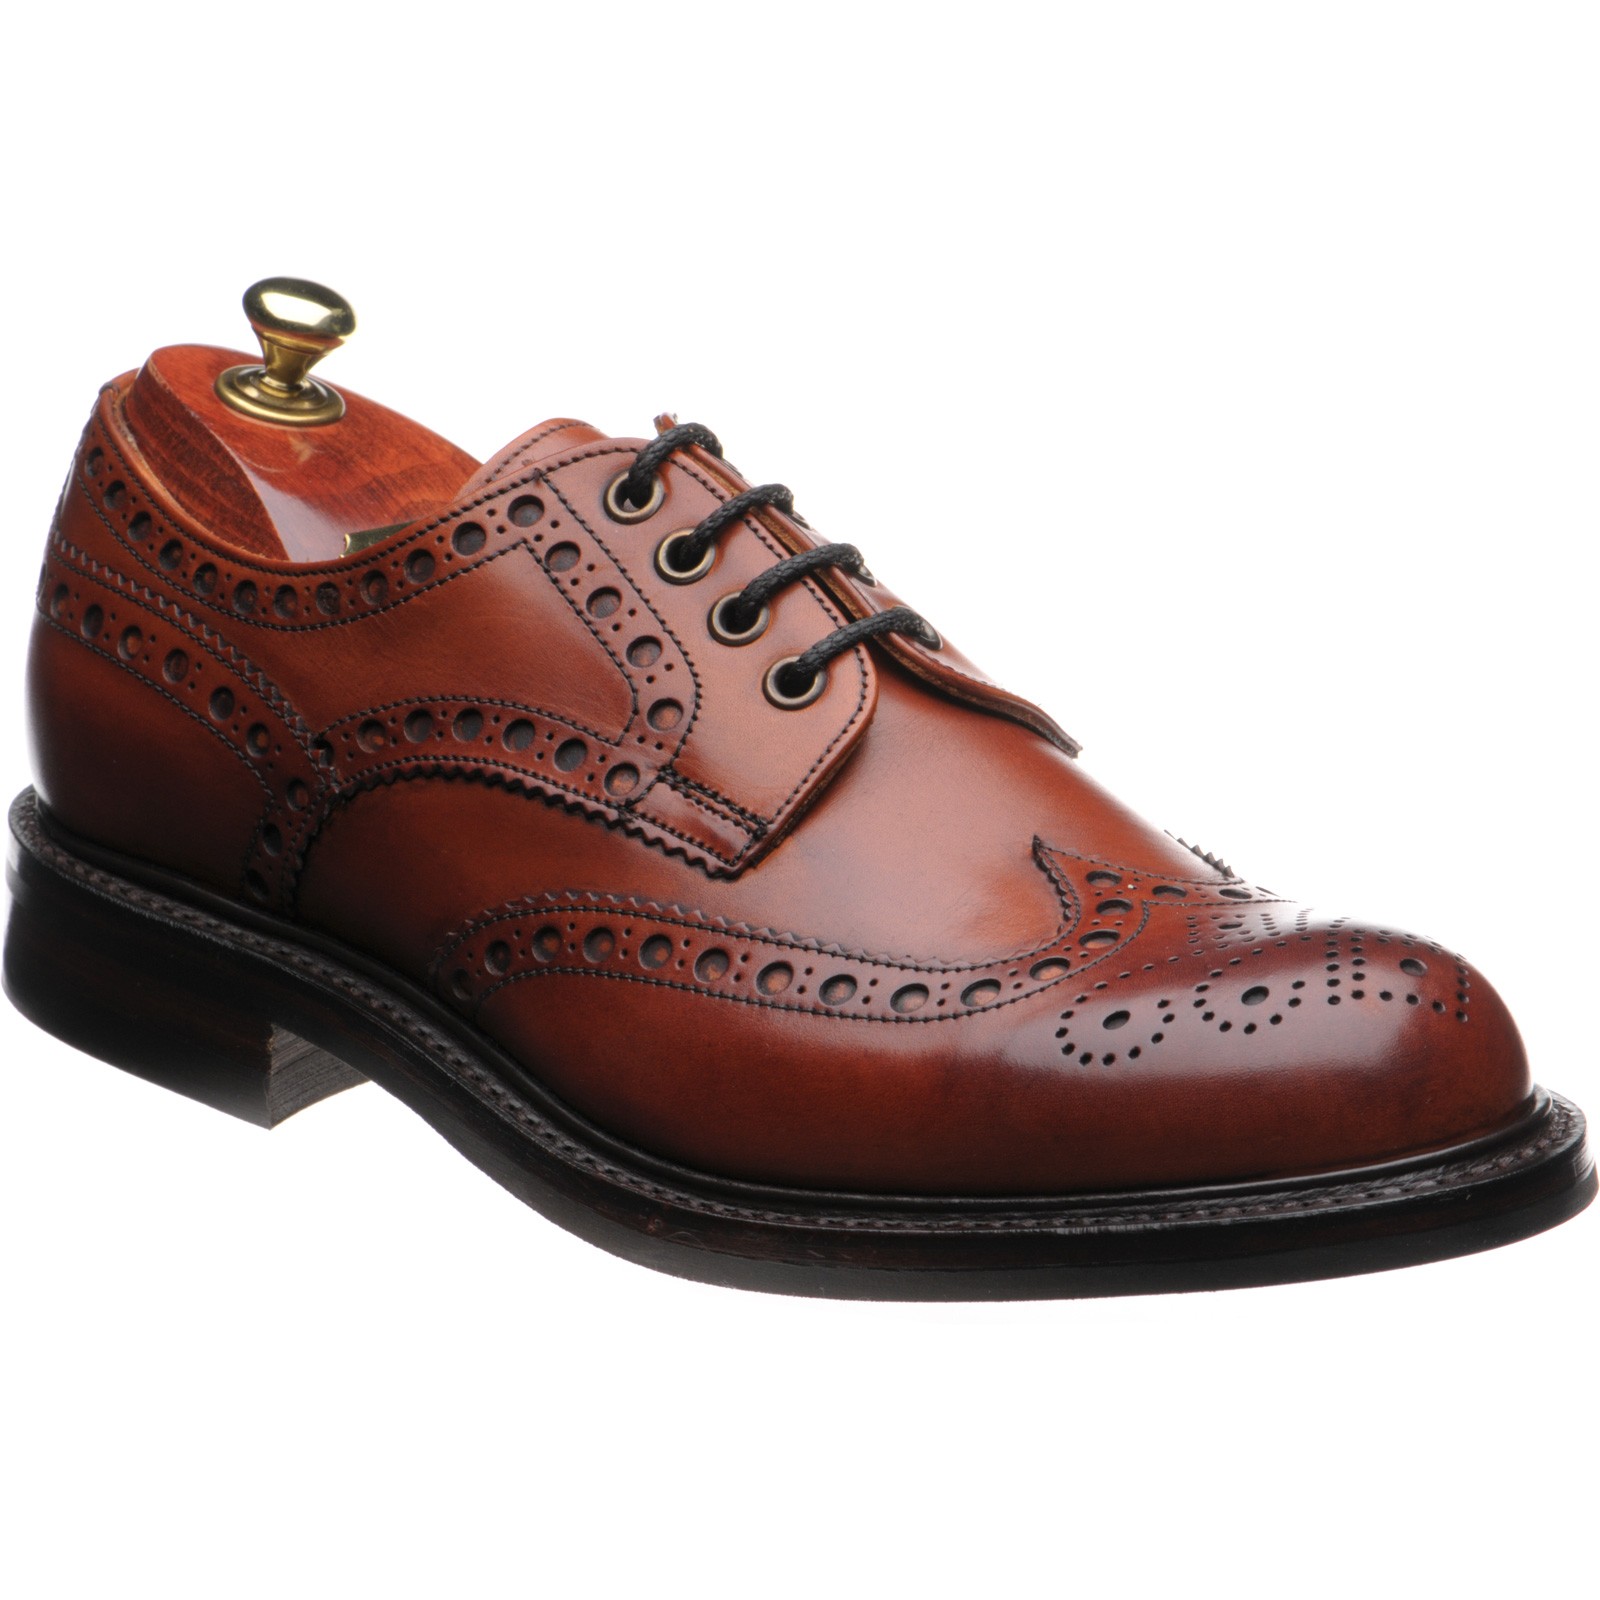 Cheaney shoes | Cheaney Country | Avon R rubber-soled brogues in Dark ...